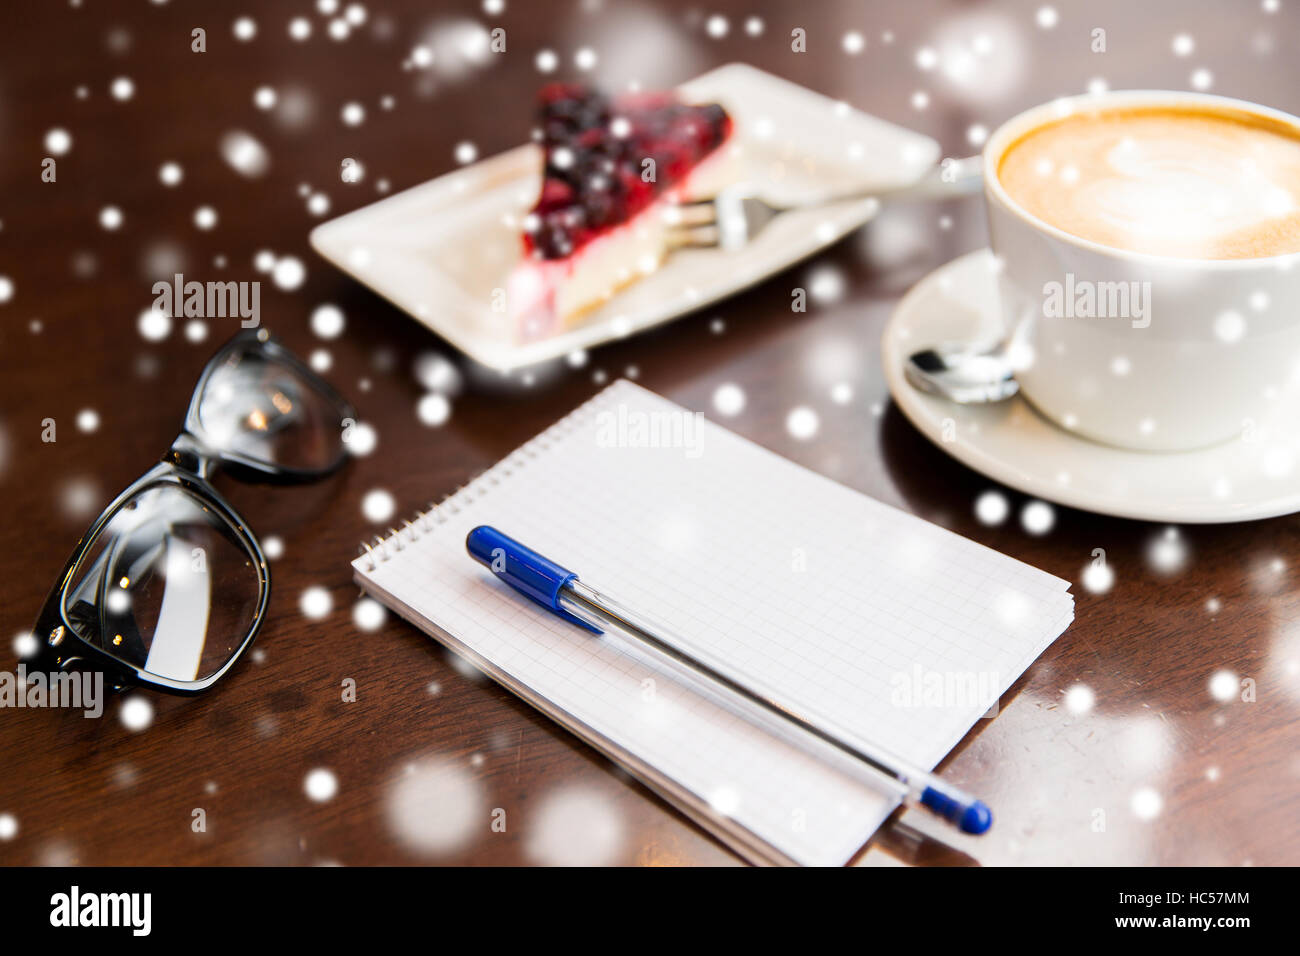 close up of notebook with pen, coffee cup and cake Stock Photo